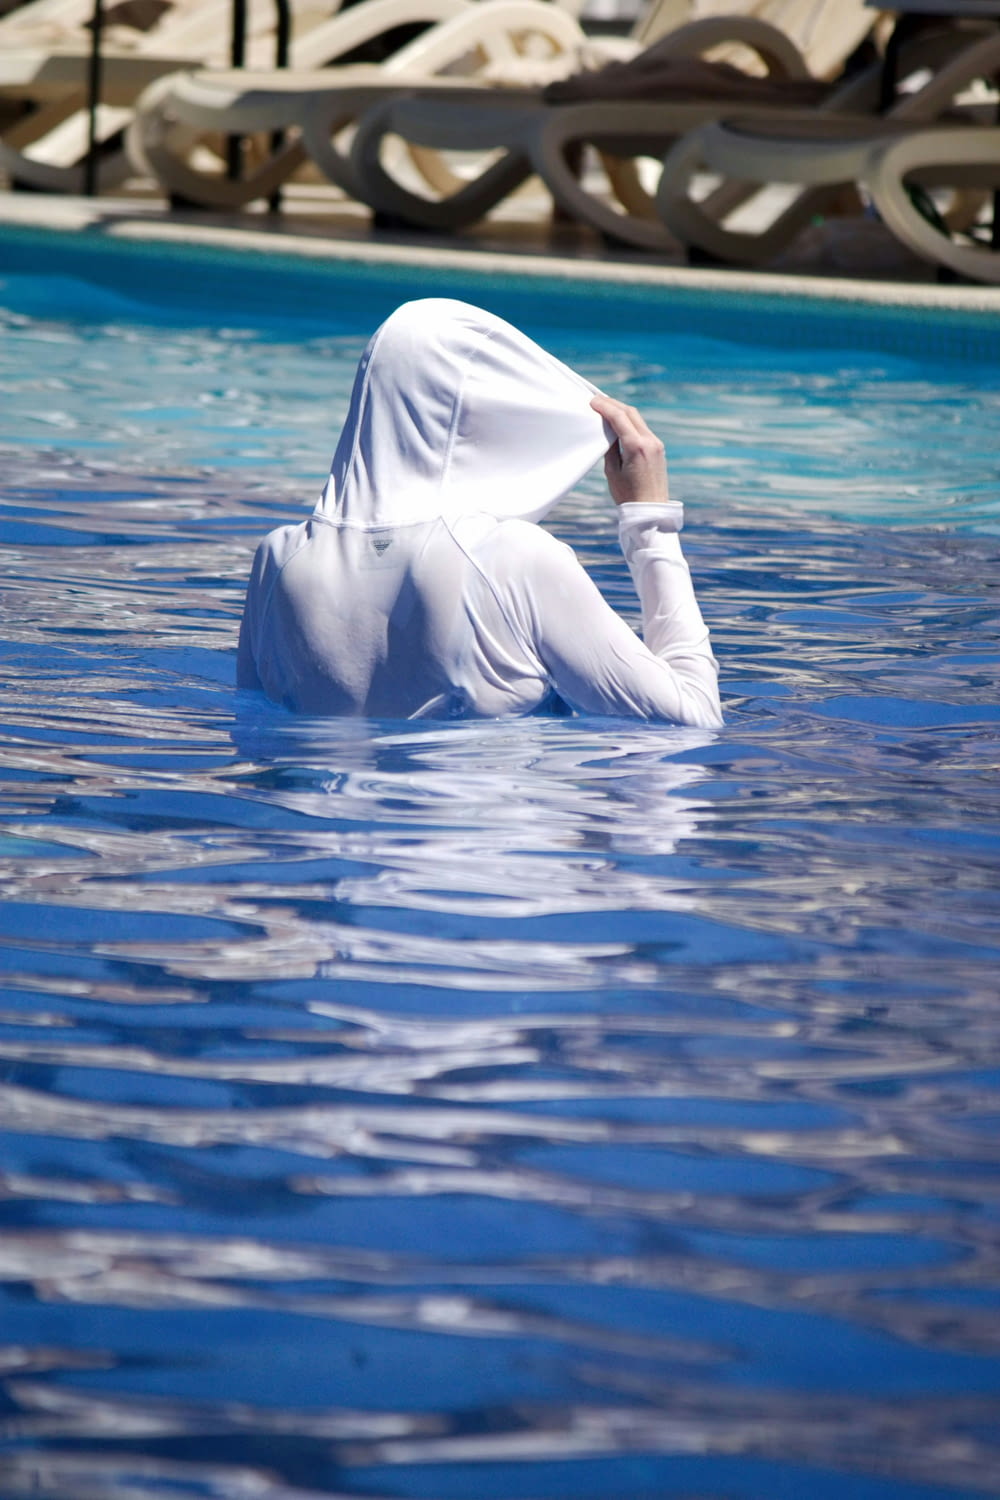 a woman in a white outfit is in a pool